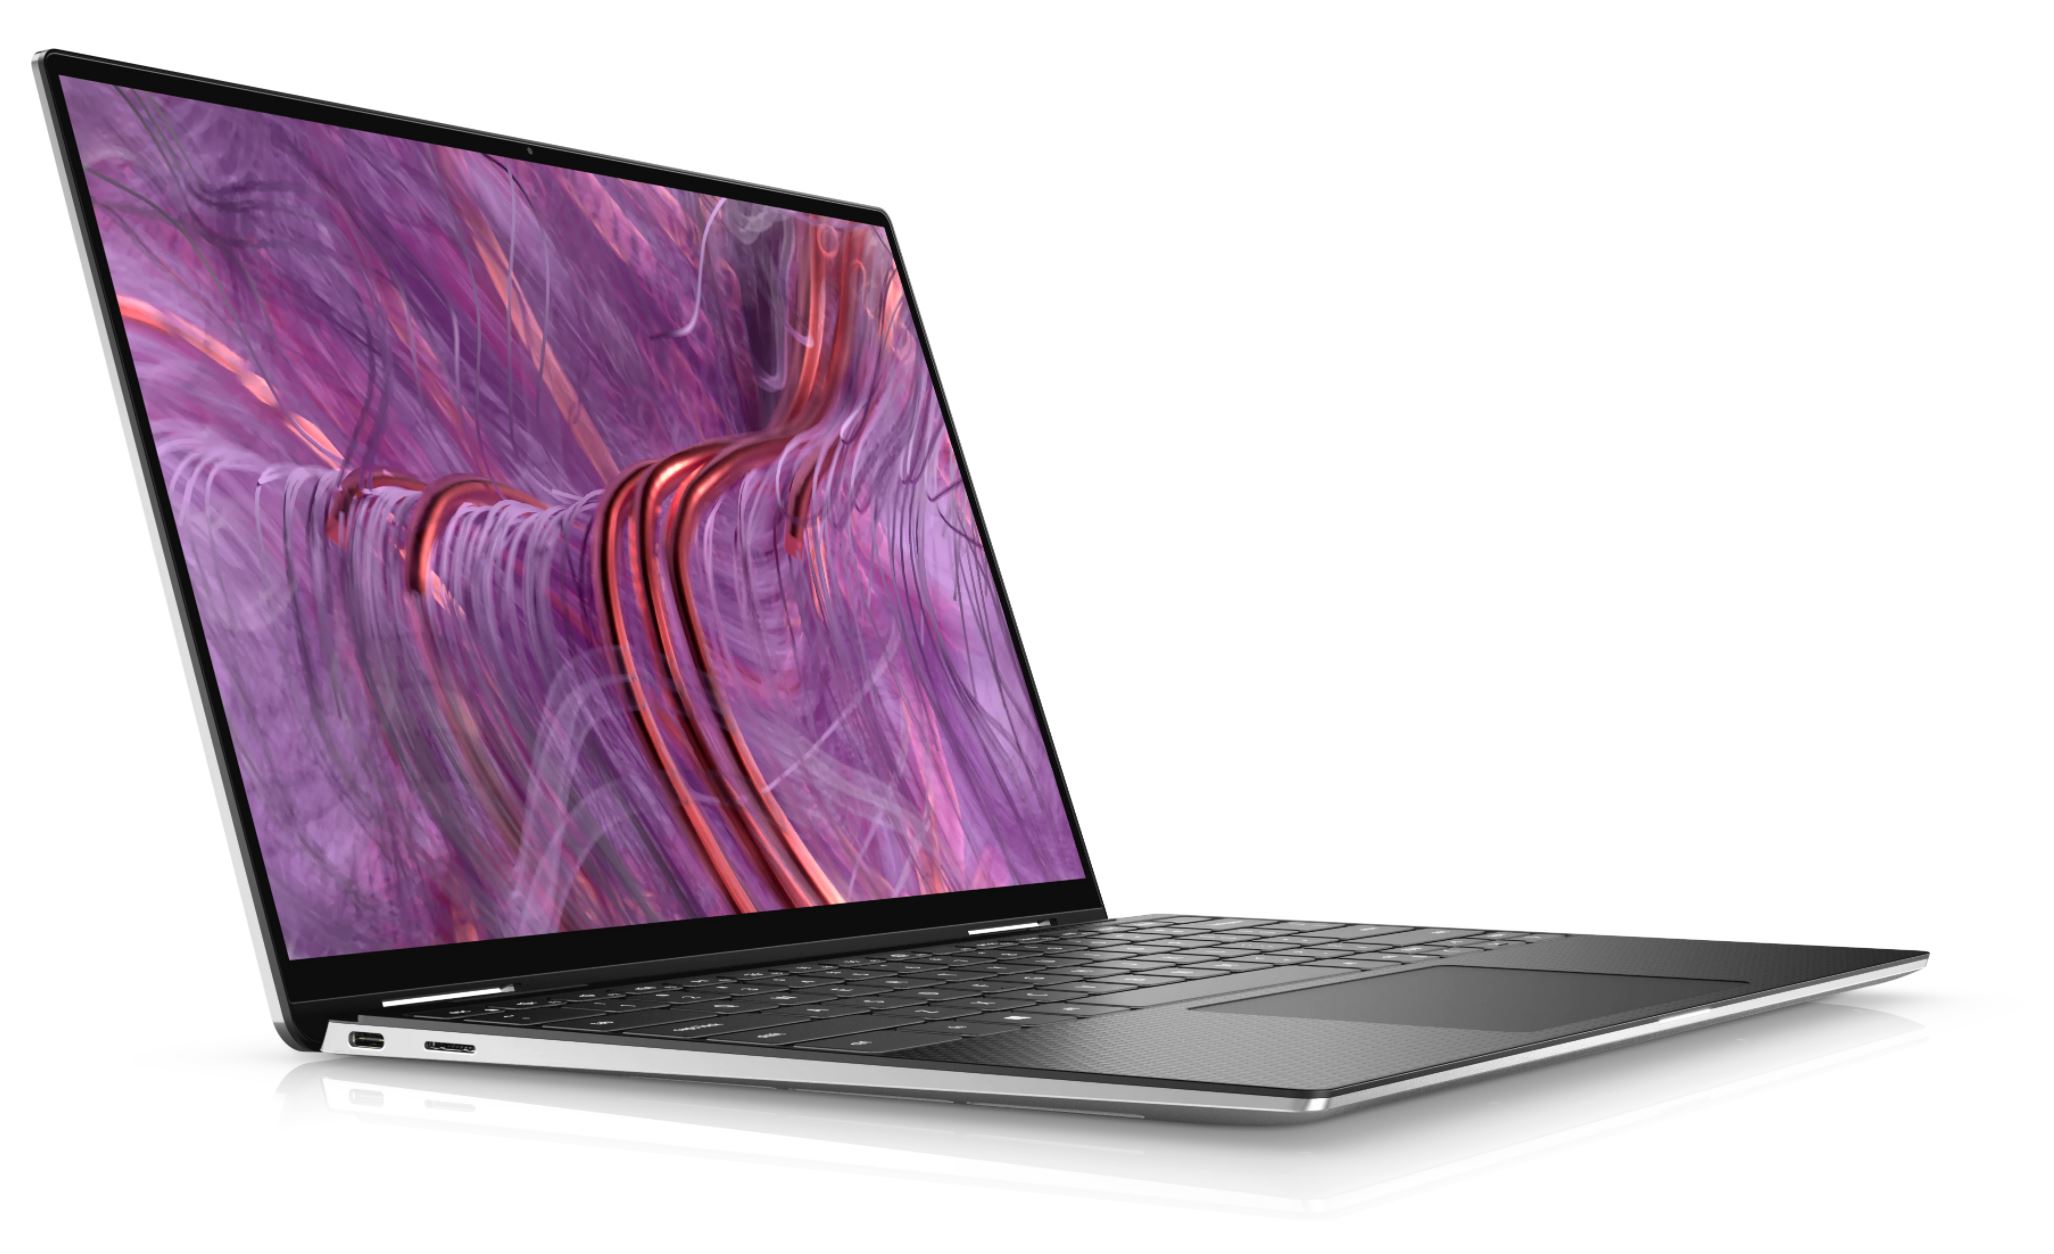 Dell XPS 13 2-in-1 Laptop Black Friday Deal